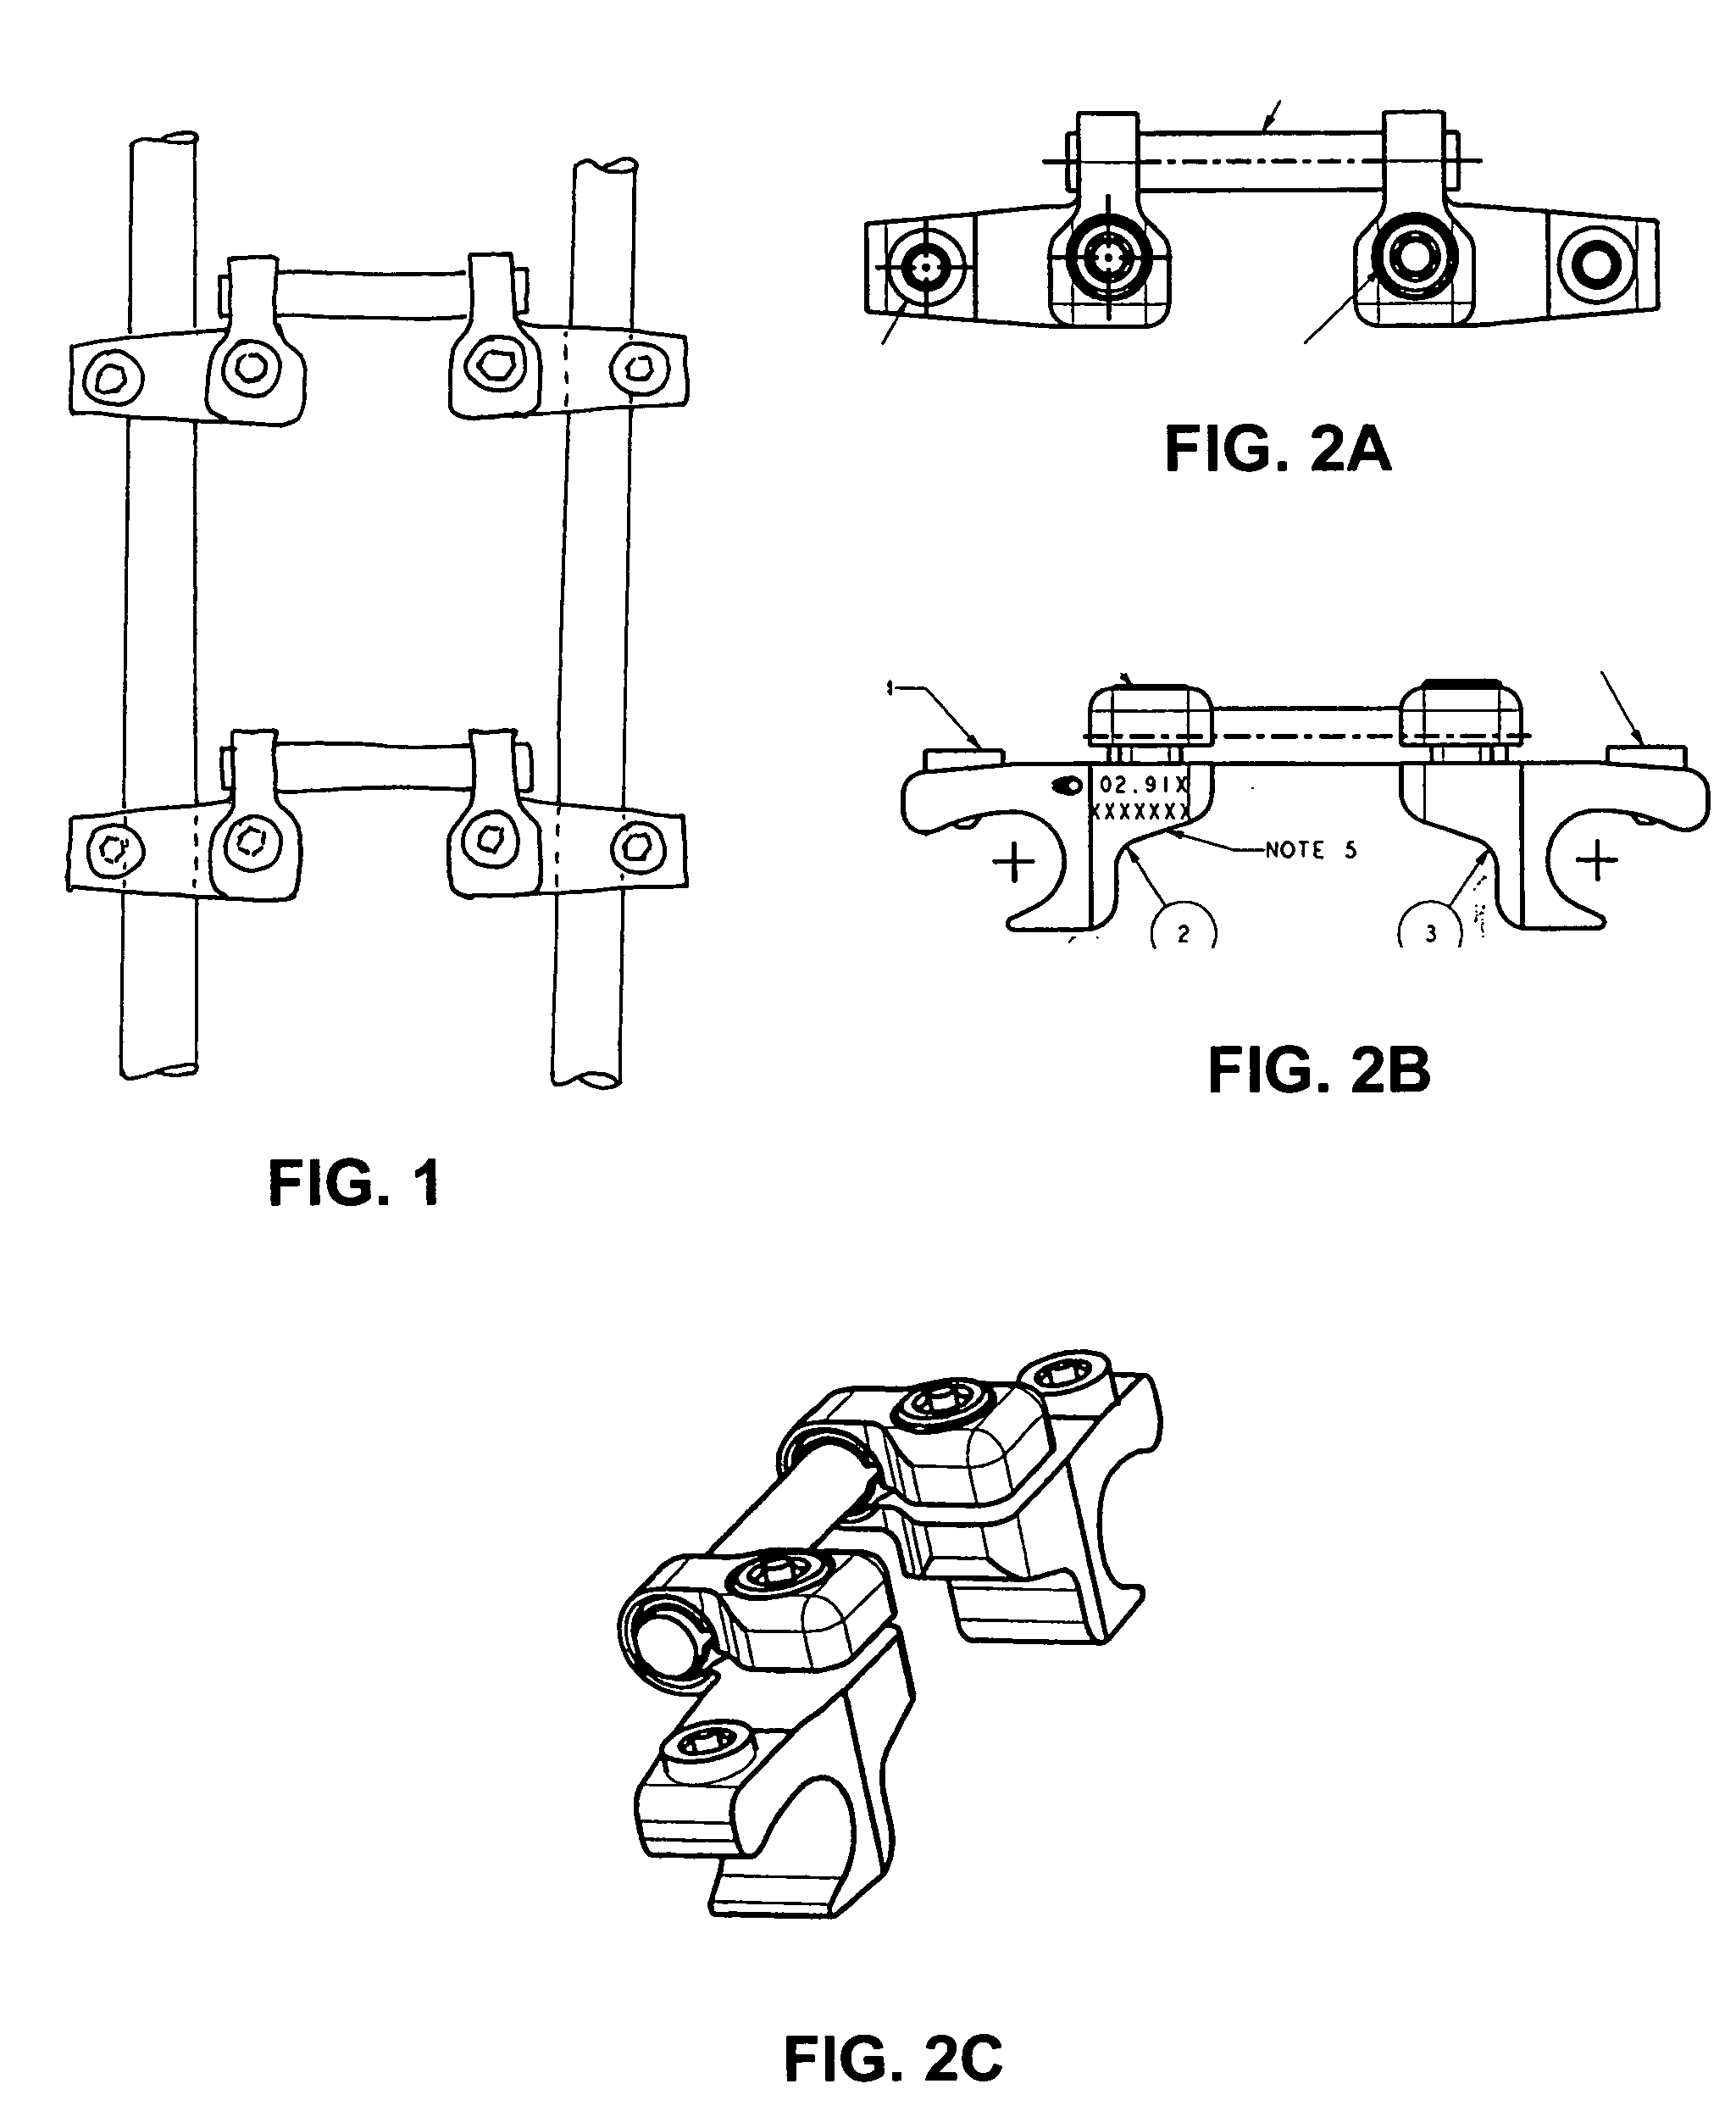 Transverse fixation device for spinal fixation systems